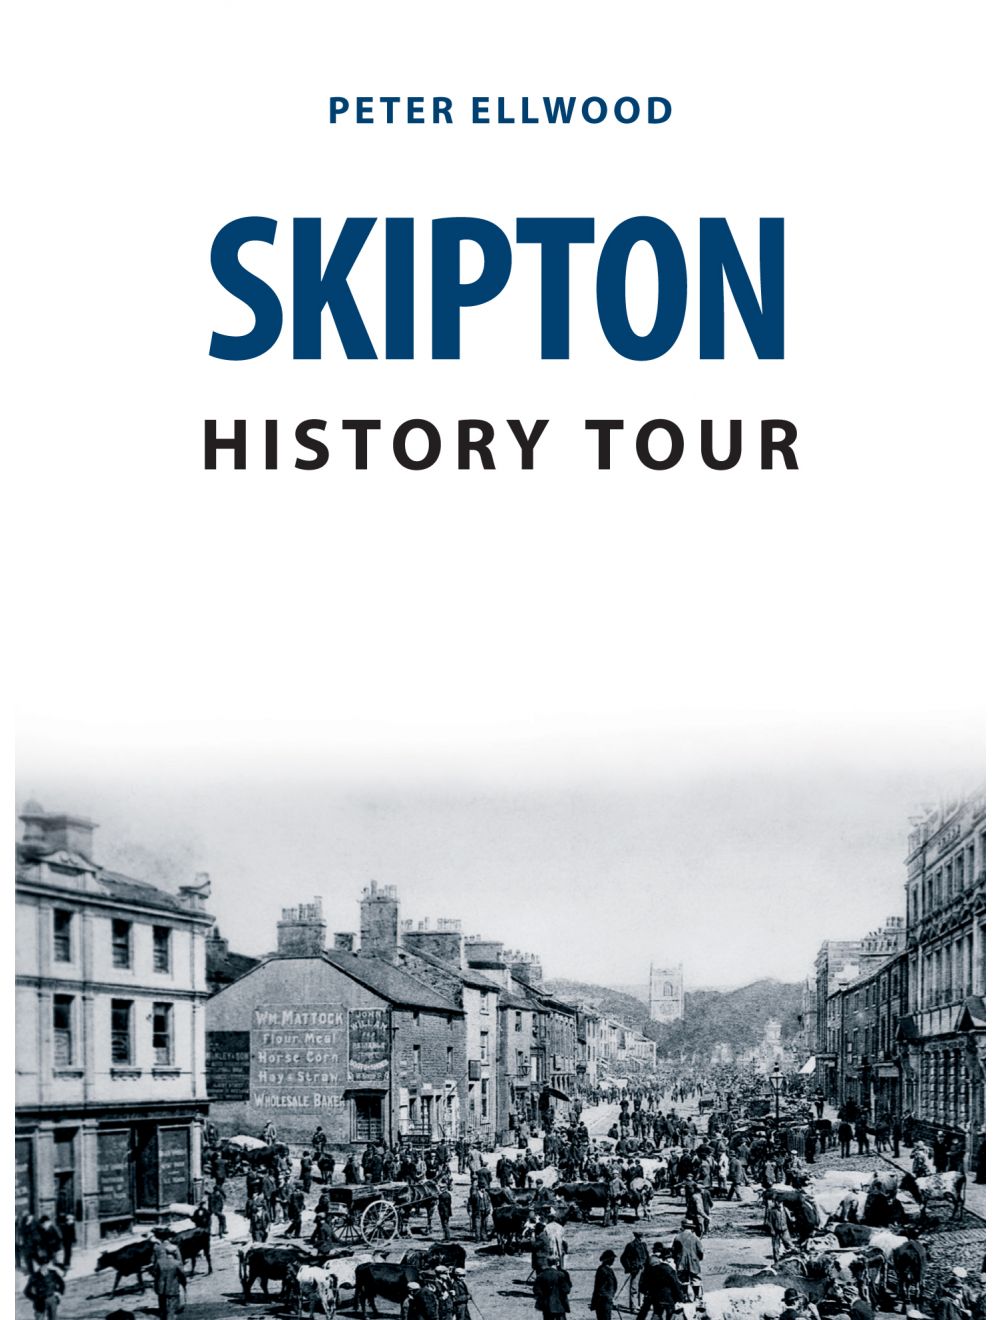 Skipton History Tour by Peter Ellwood